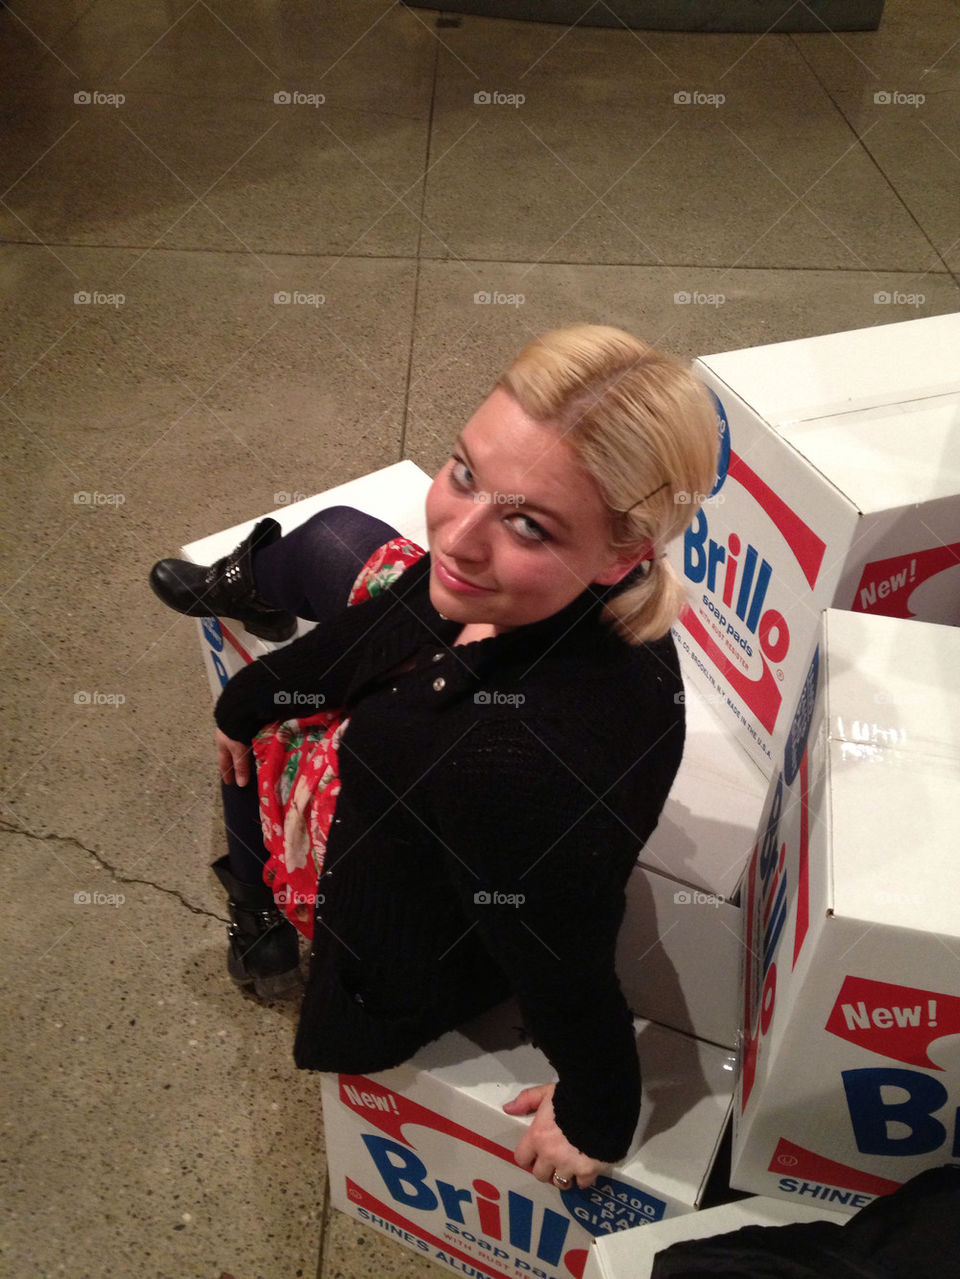 Sitting on Brillo boxes at the Andy Warhol Museum in Pittsburgh, PA!